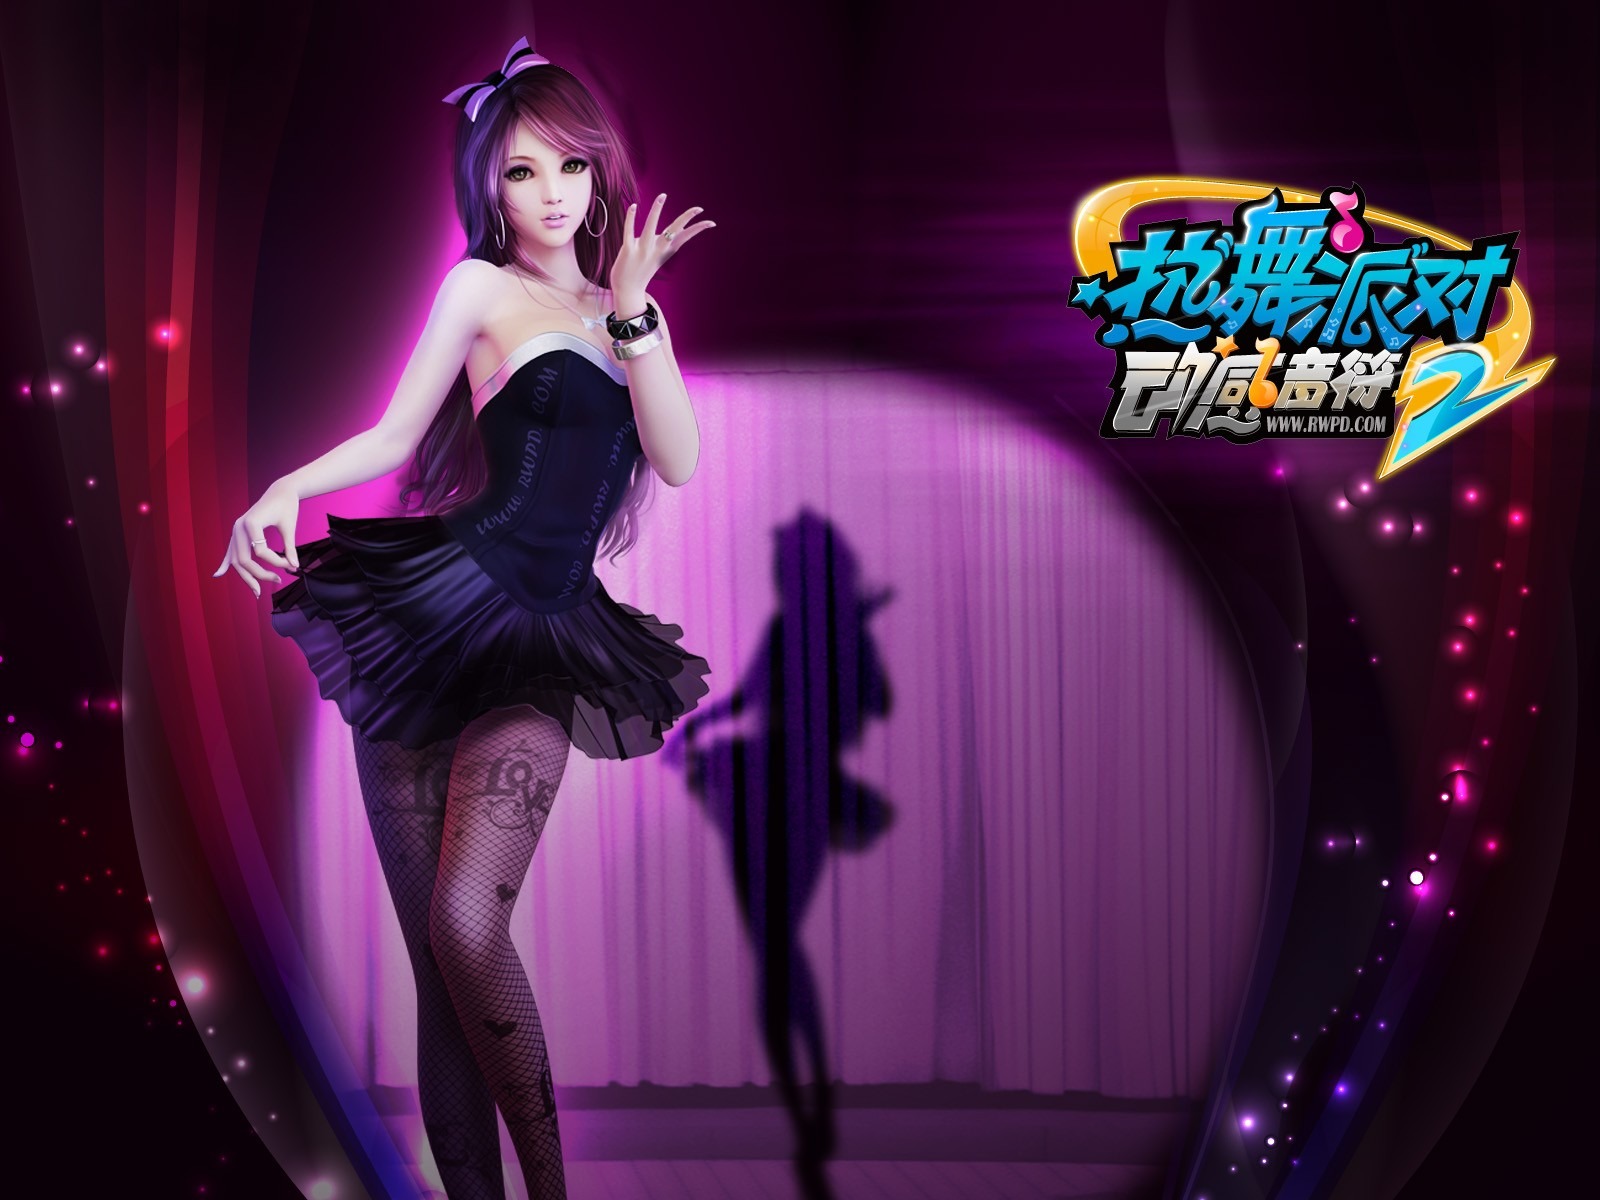 Online game Hot Dance Party II official wallpapers #29 - 1600x1200